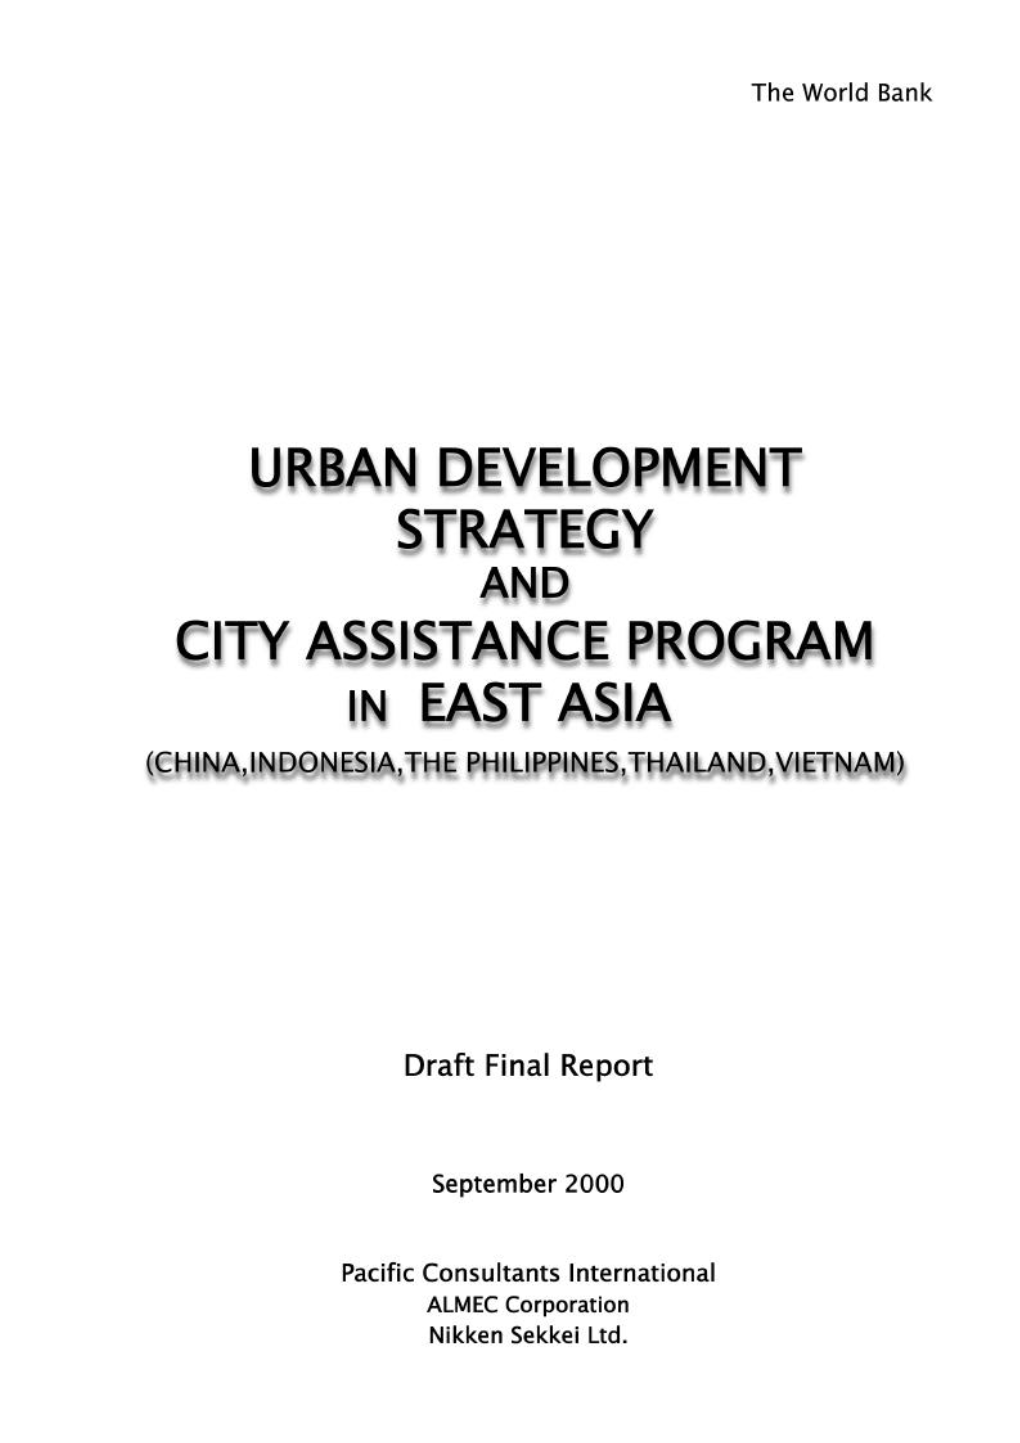 Urban Development Strategy and City Assistance Program in East Asia